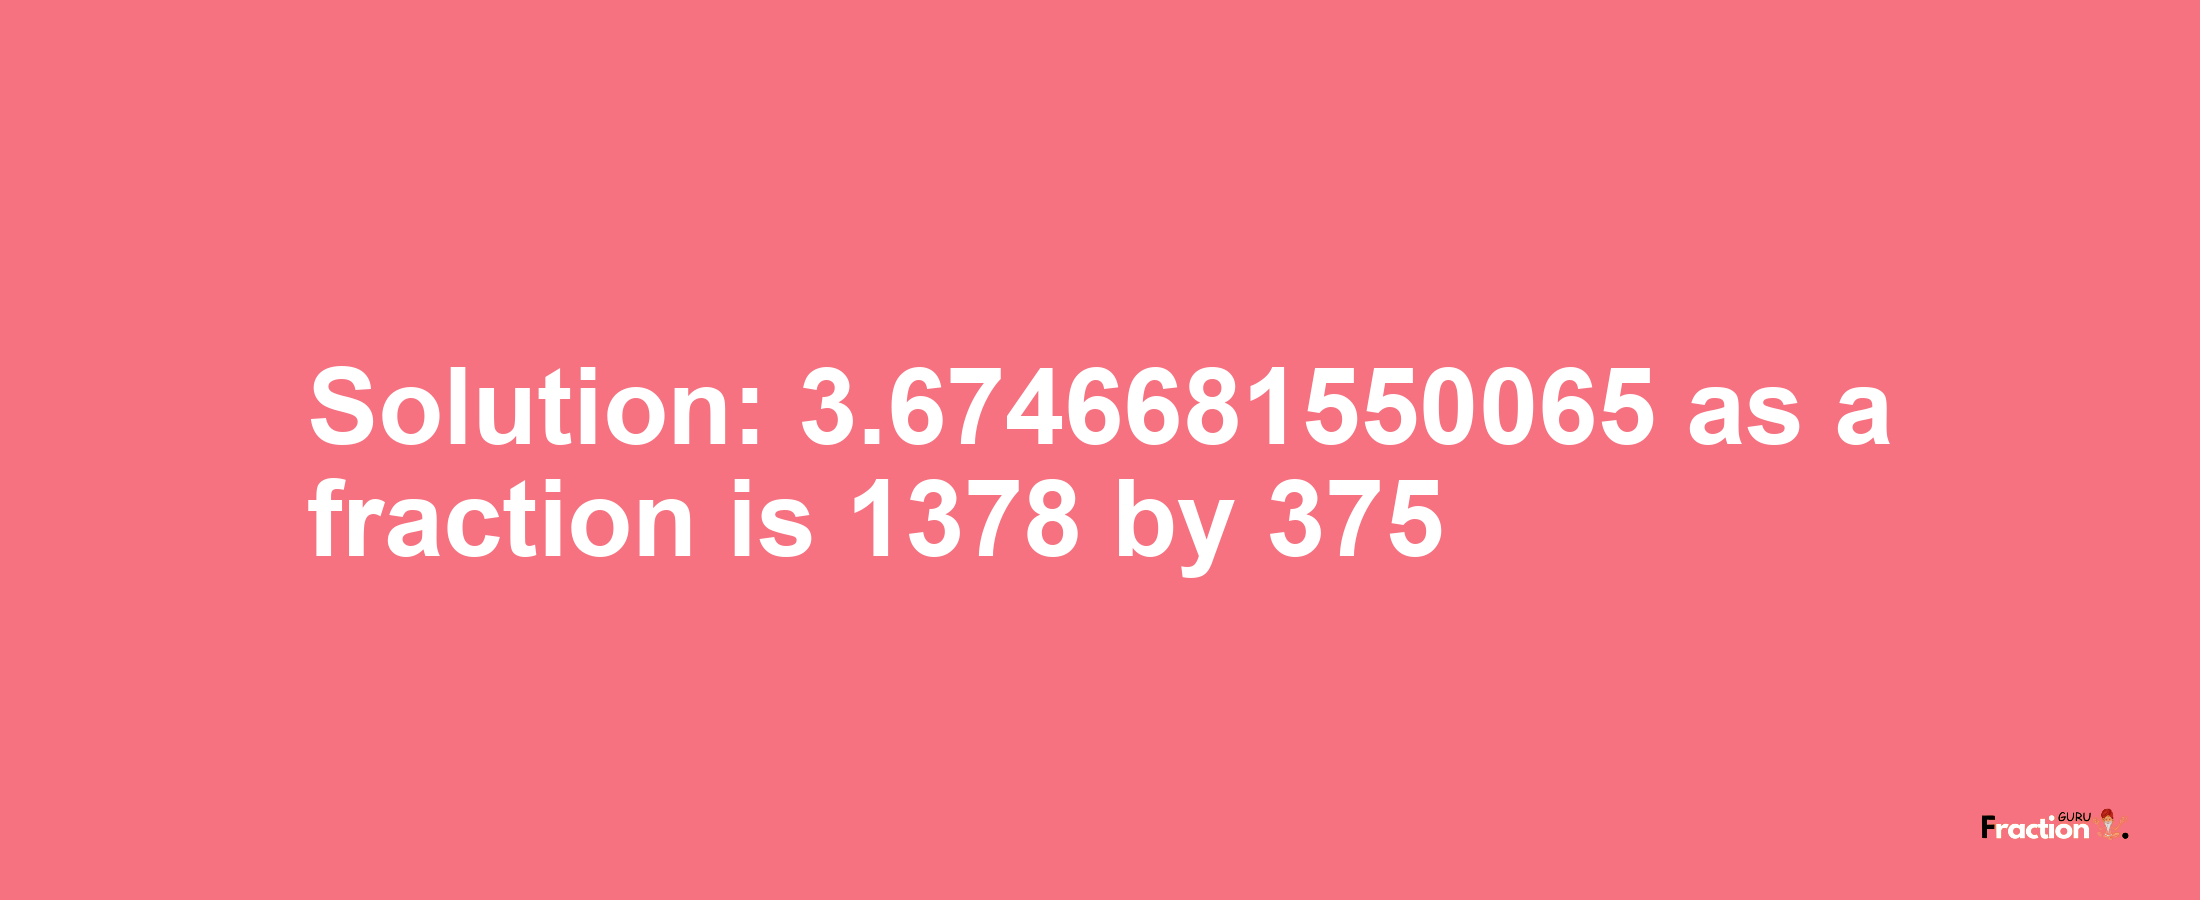 Solution:3.6746681550065 as a fraction is 1378/375